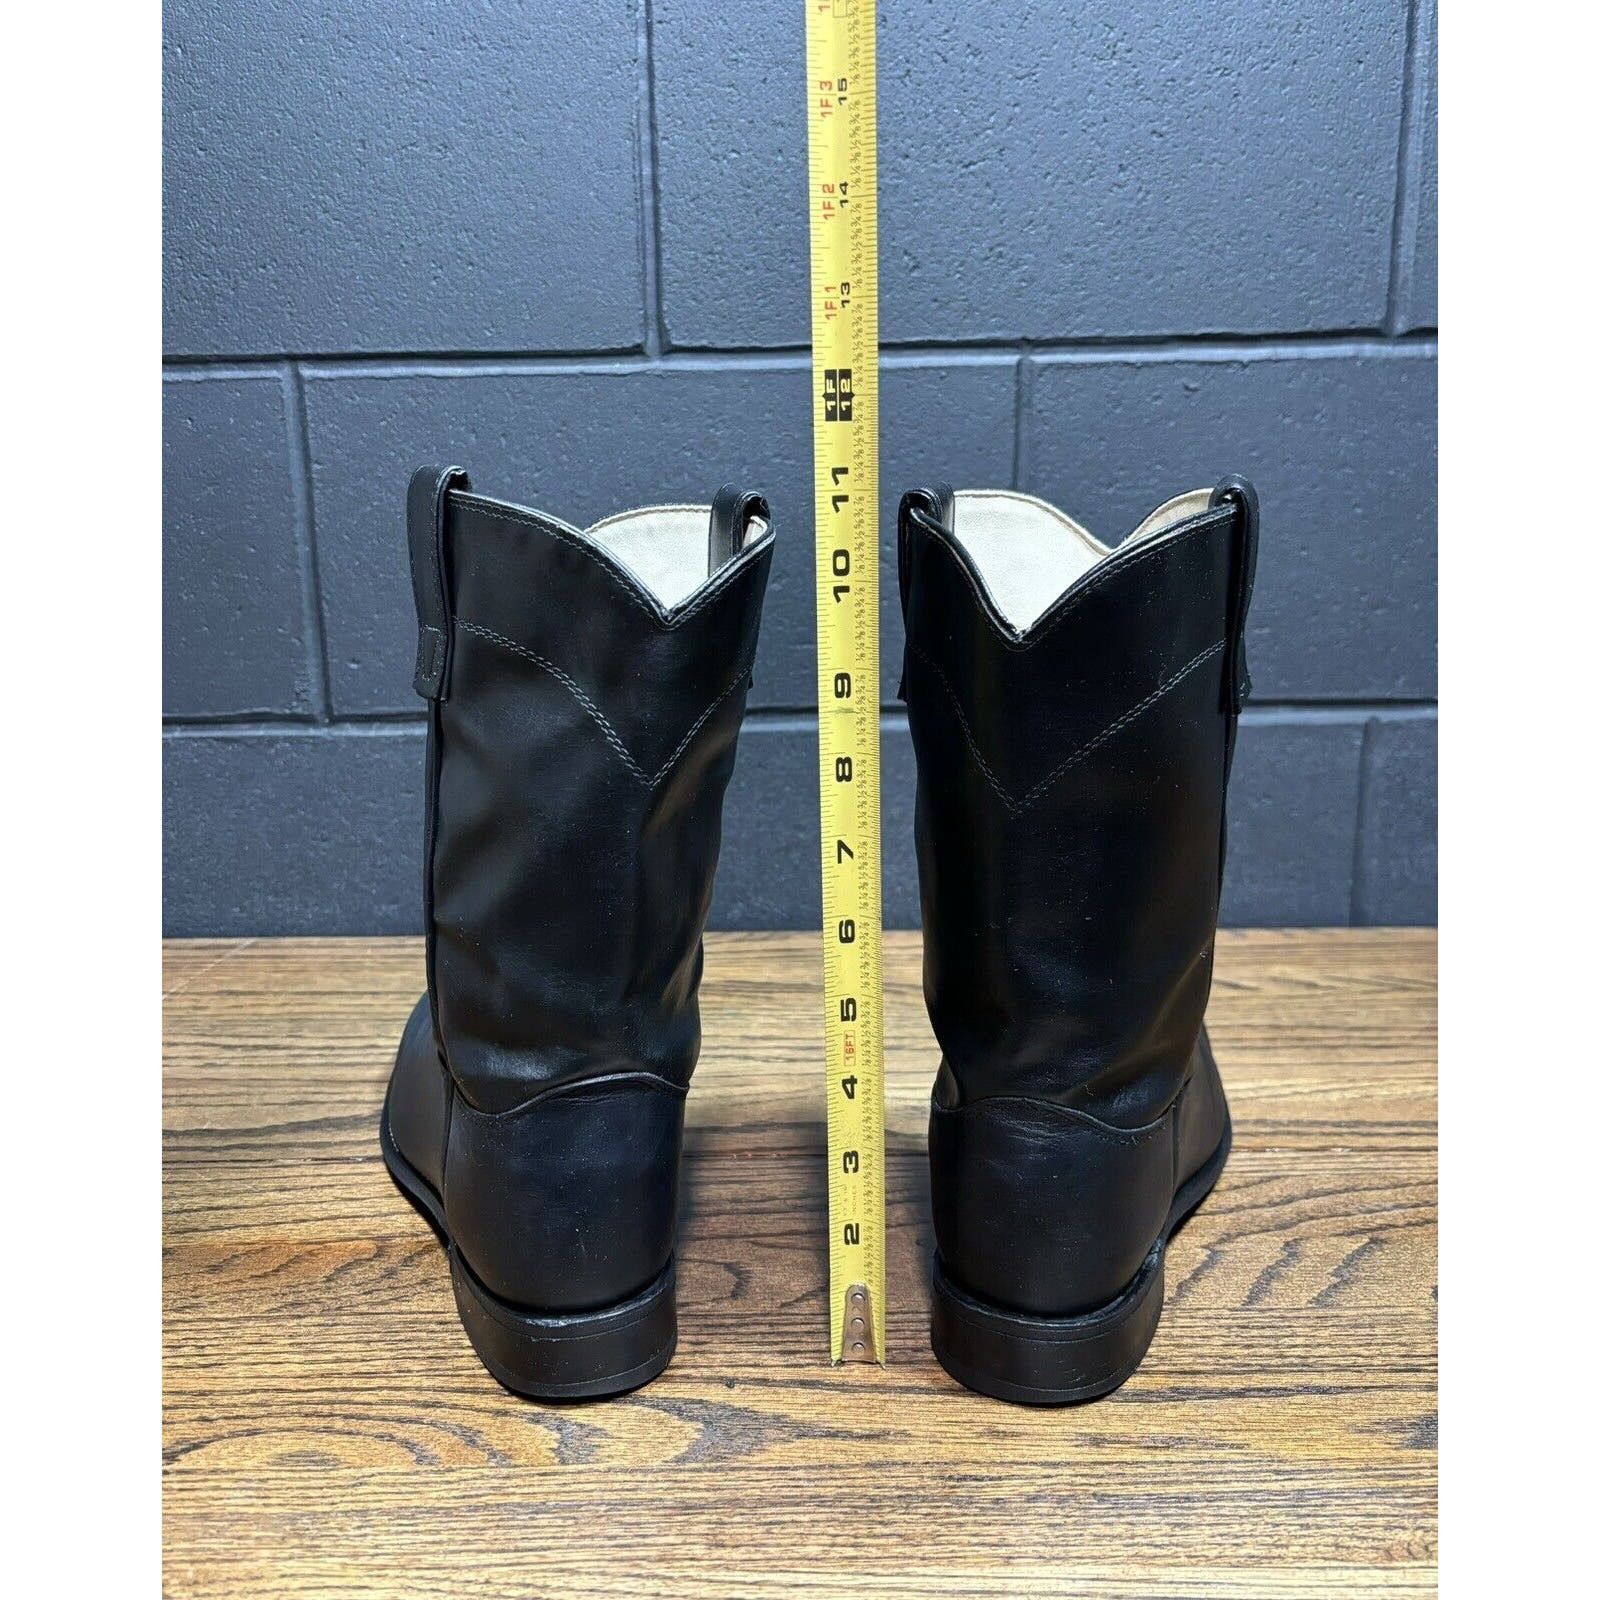 Other Texas 4400 Black Leather Western Cowgirl Boots Size US 8.5 / IT 38.5 - 5 Thumbnail